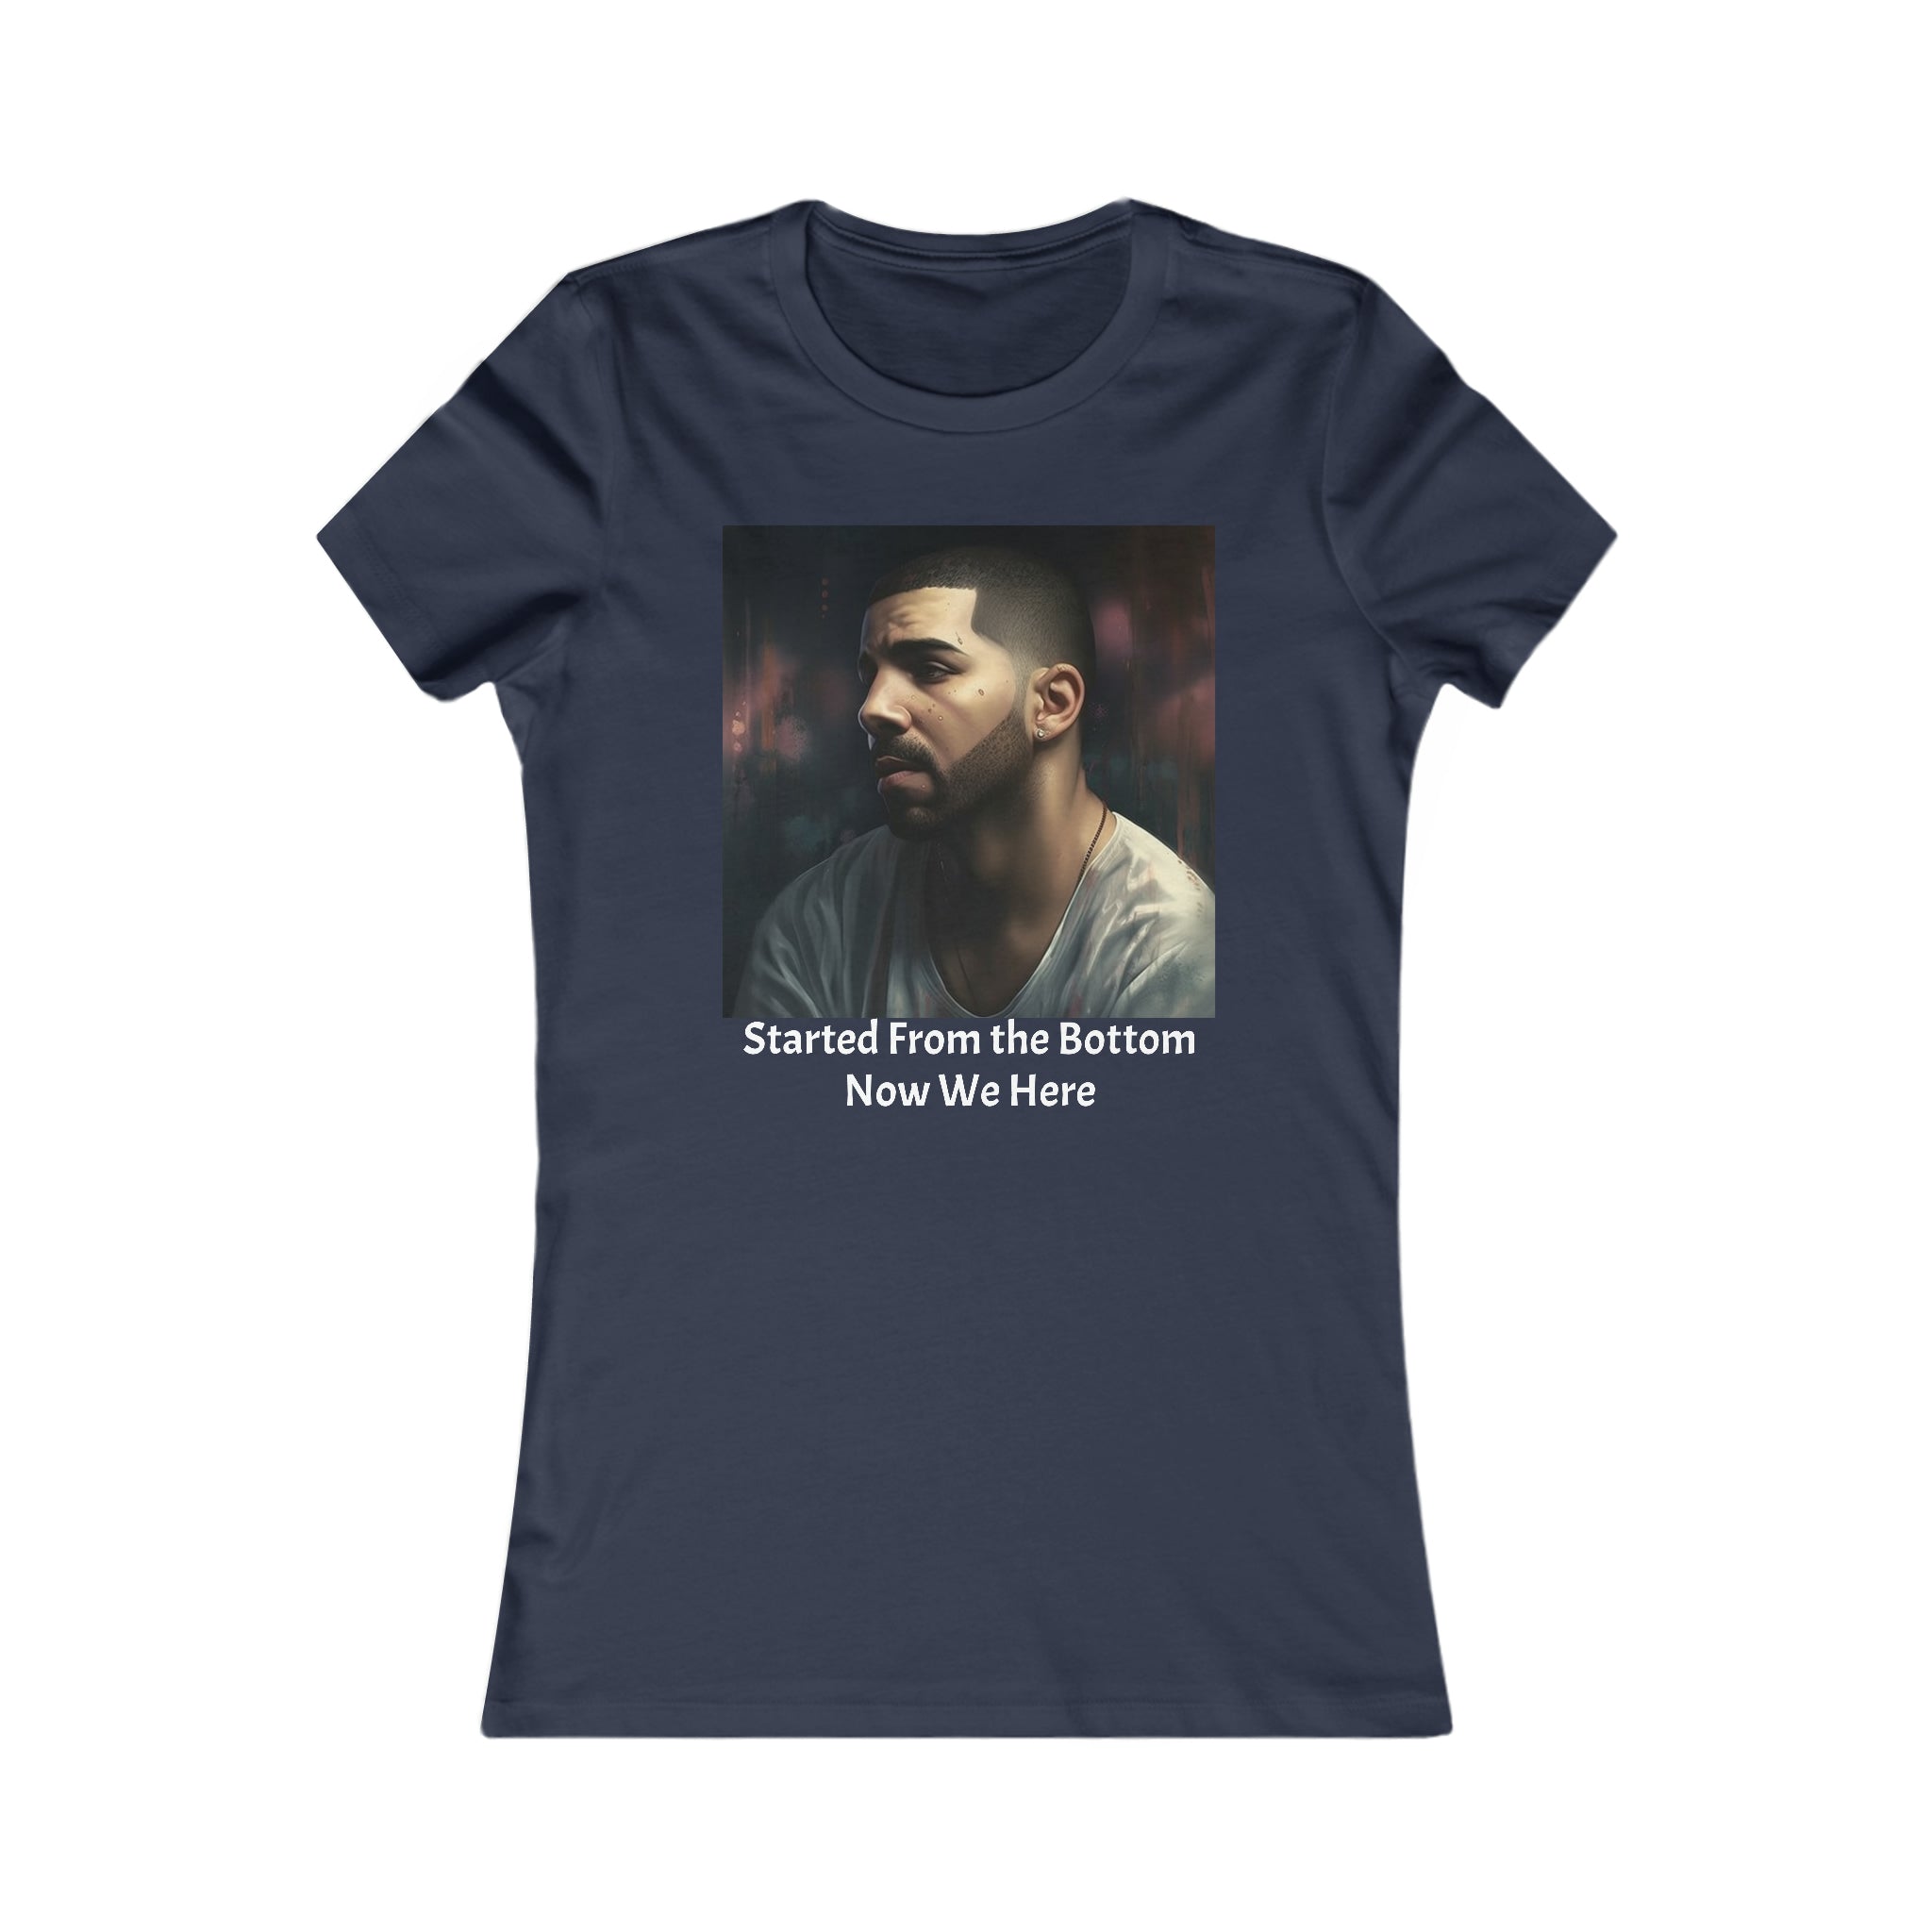 "Started from the Bottom Now We Here" Drizzy-Inspired Women's Favorite Tee - Empowering Lyric Tee for Aspiring Achievers